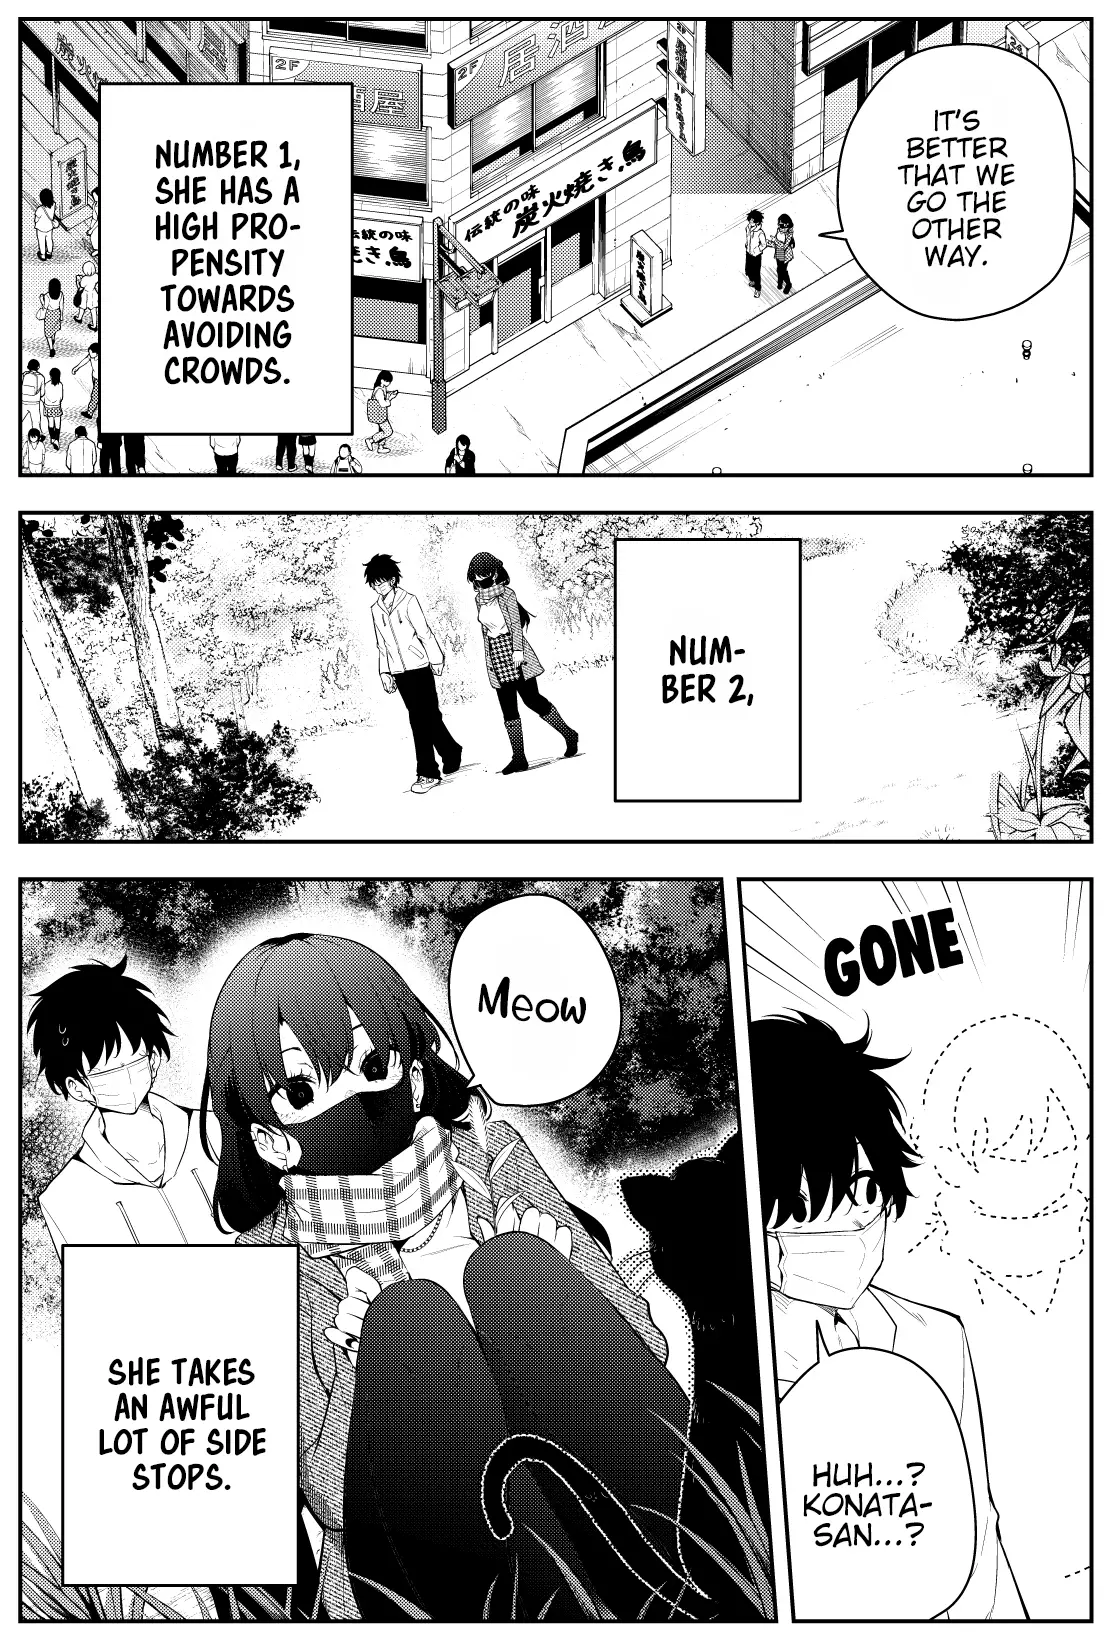 The Story Of A Manga Artist Confined By A Strange High School Girl - 33 page 2-87c6b37f